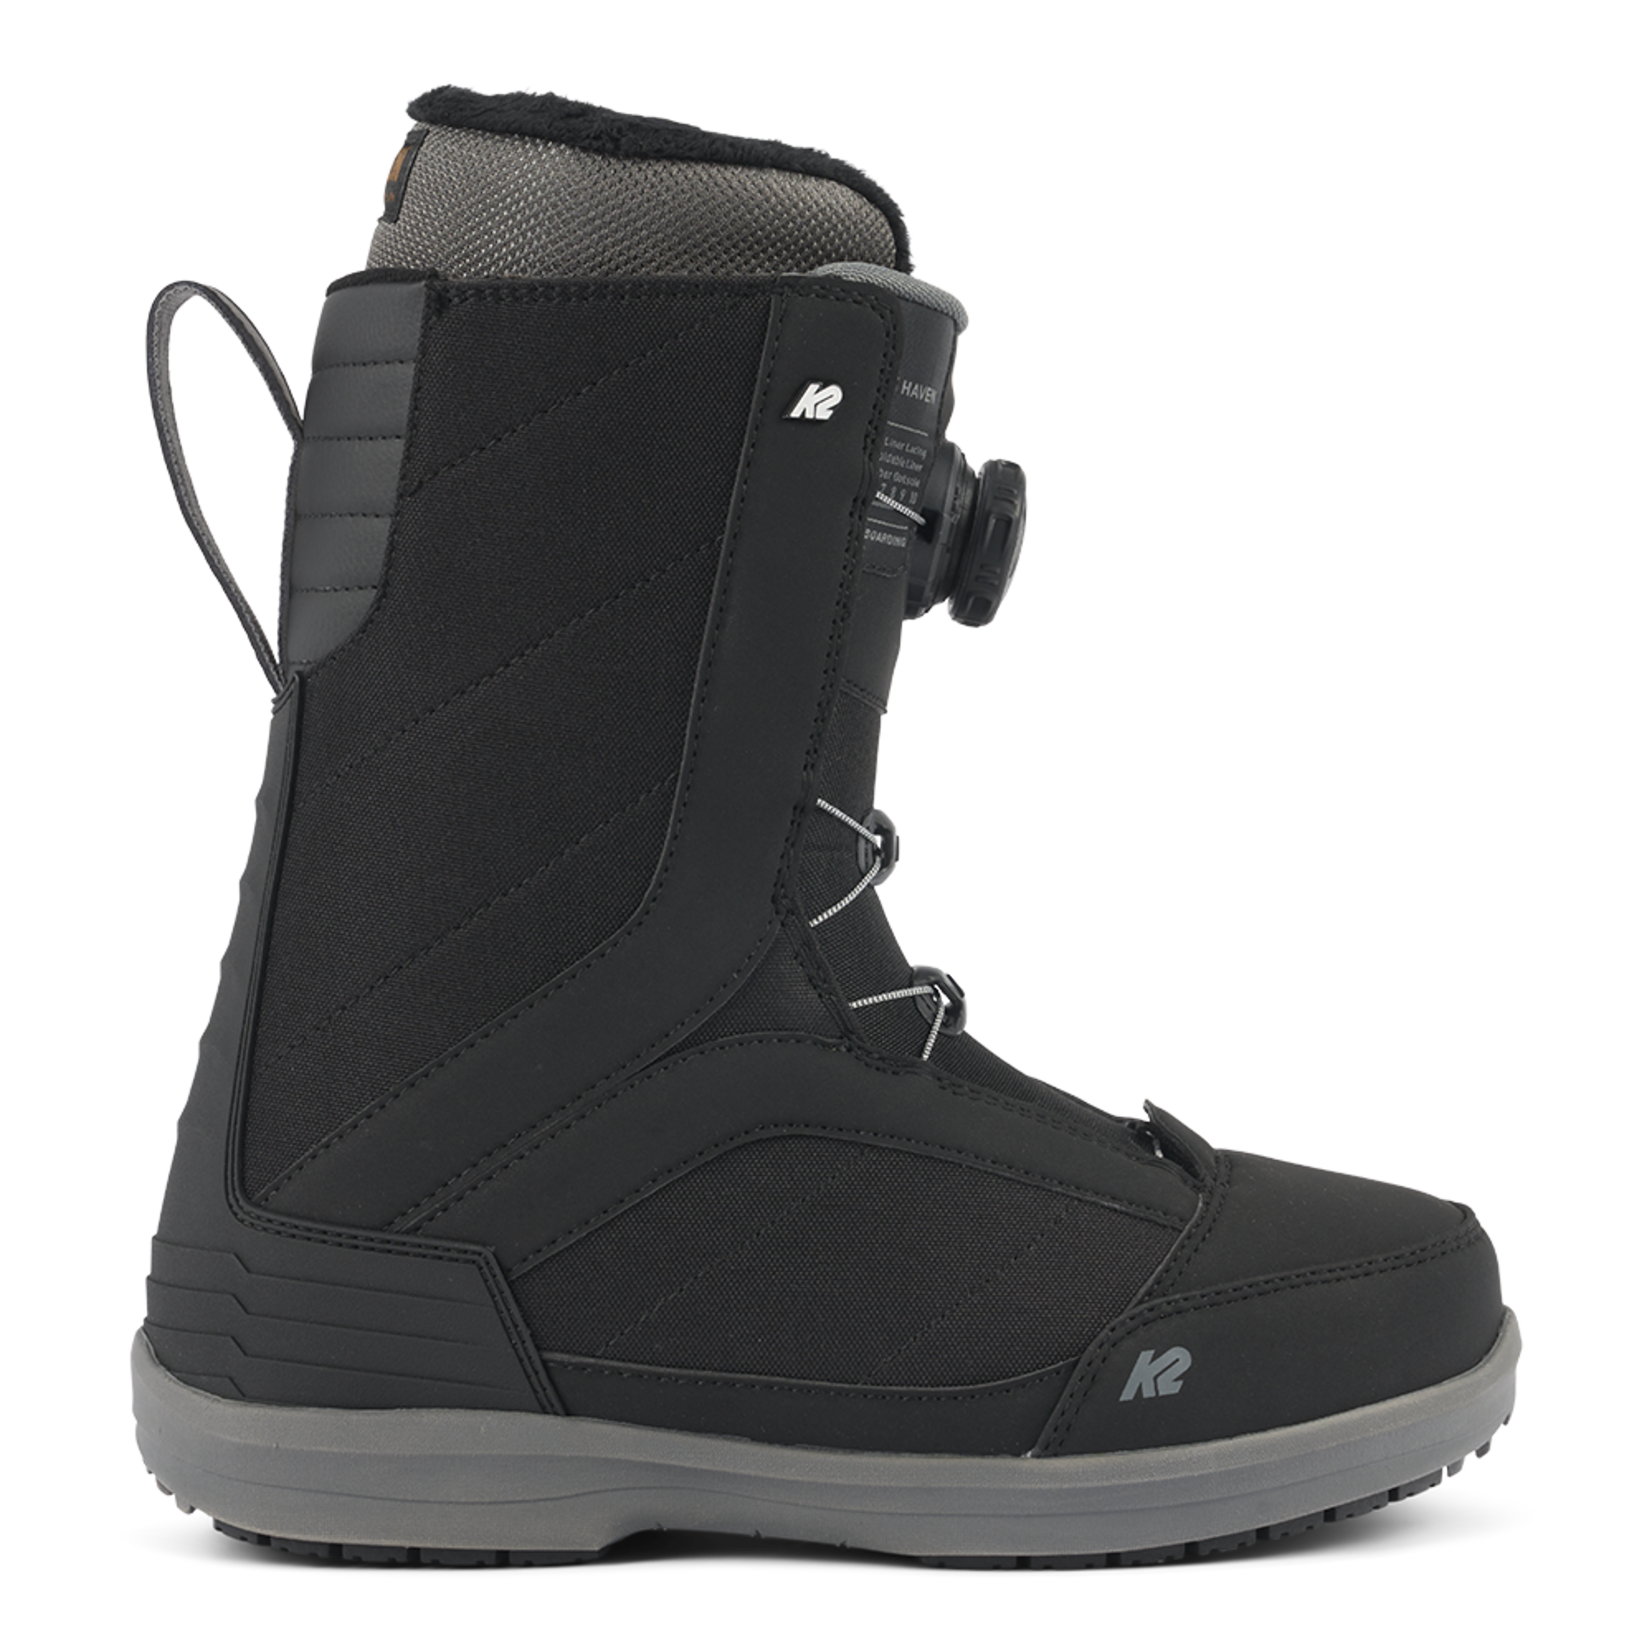 K2 HAVEN Boots - 2024